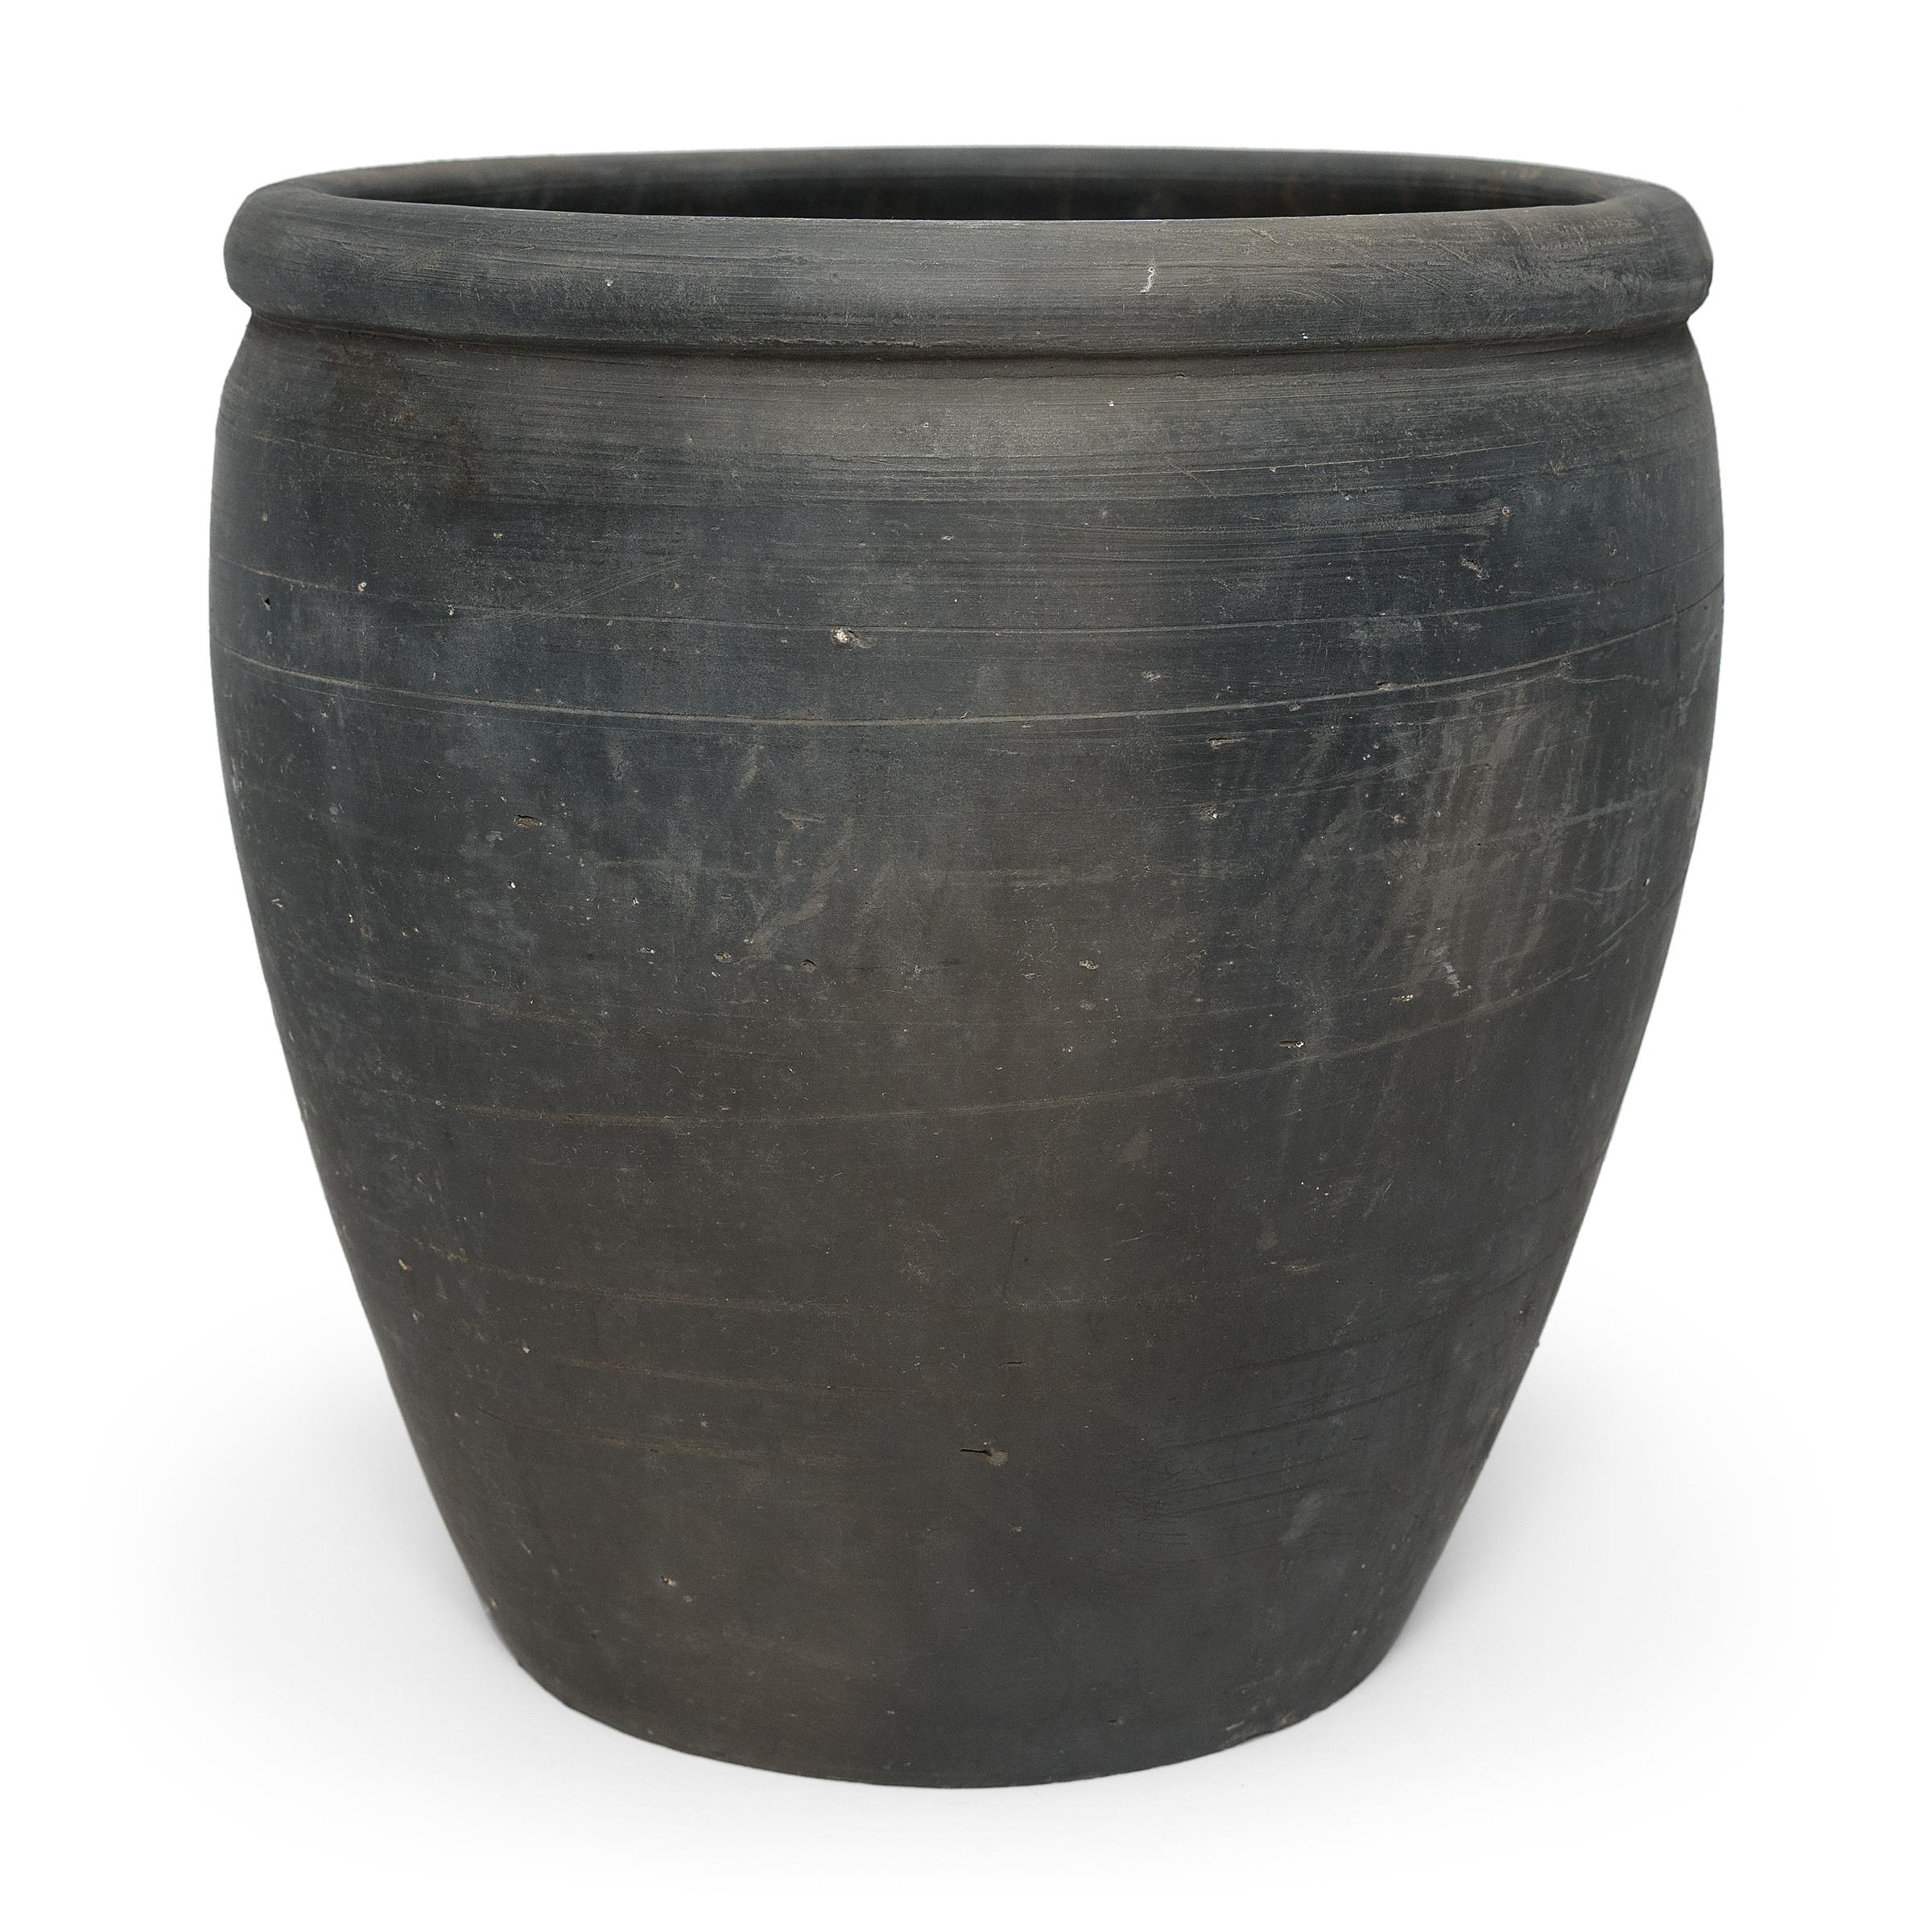 Sculpted during the early 20th century in China's Shanxi province, this vessel has a smoky black exterior with balanced proportions and a beautifully irregular unglazed surface. Charged with the humble task of storing dry goods, this earthenware jar